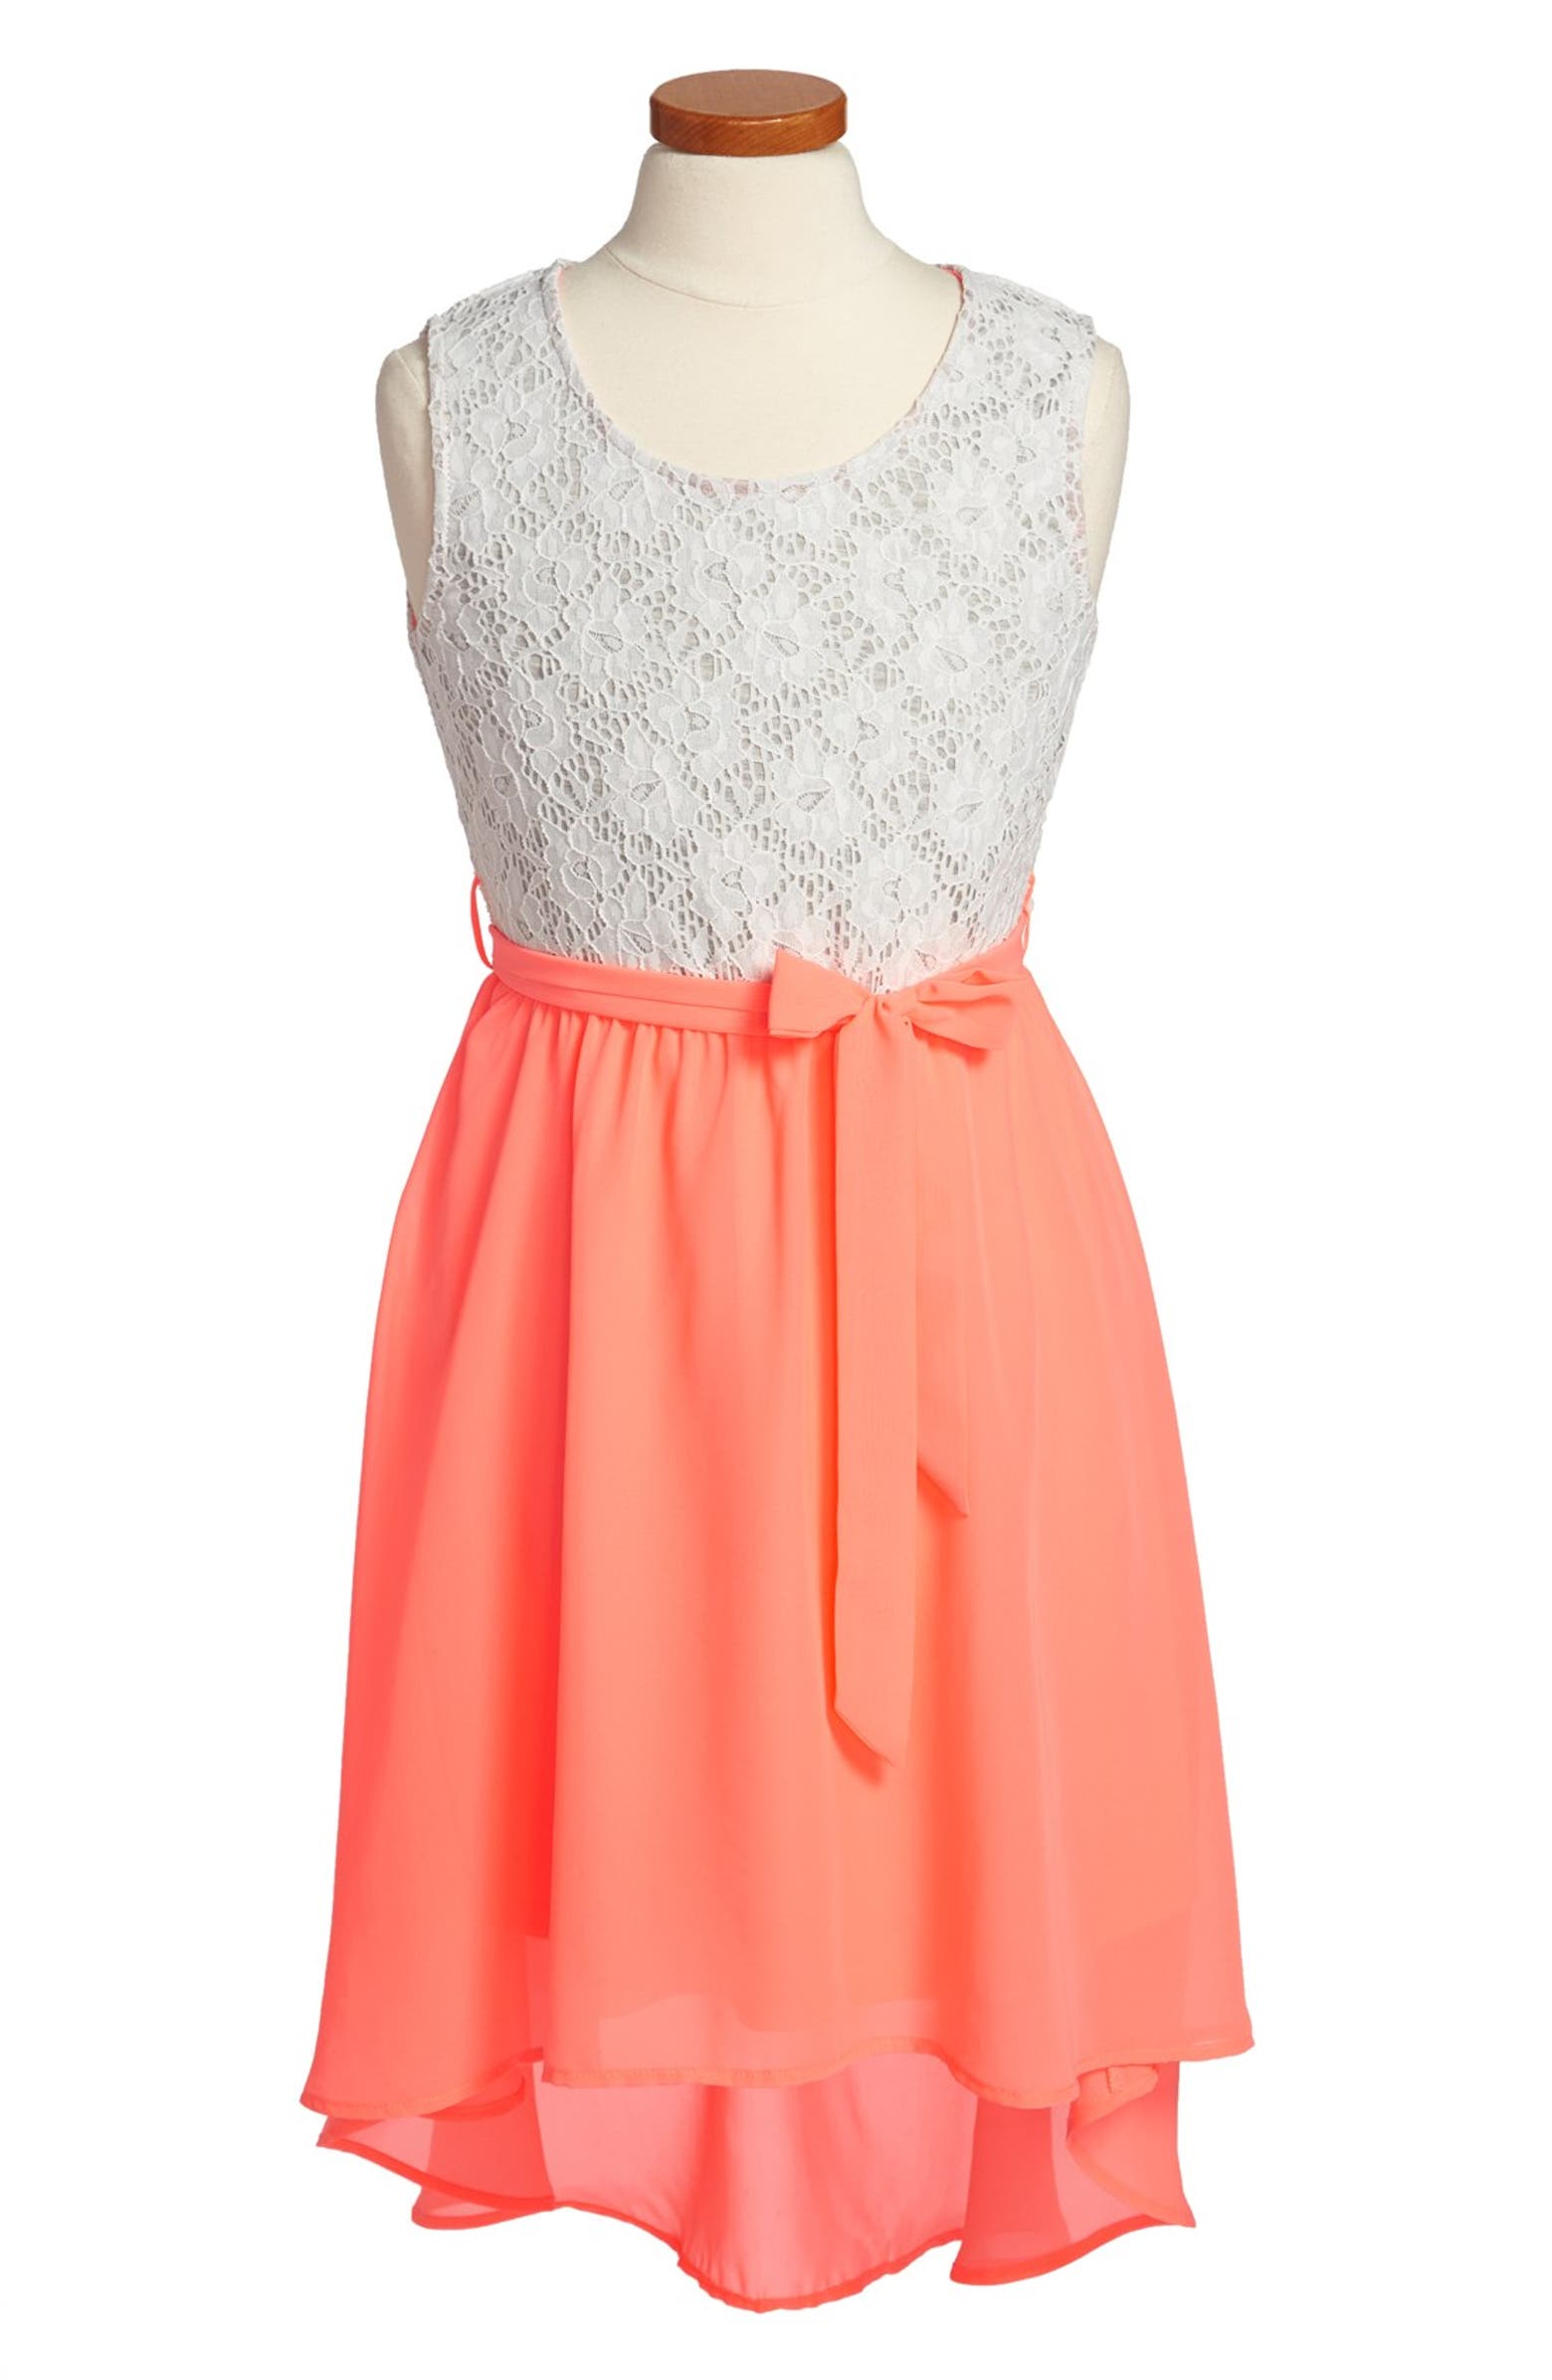 W Girl Lace Bodice High/Low Dress (Big Girls) | Nordstrom